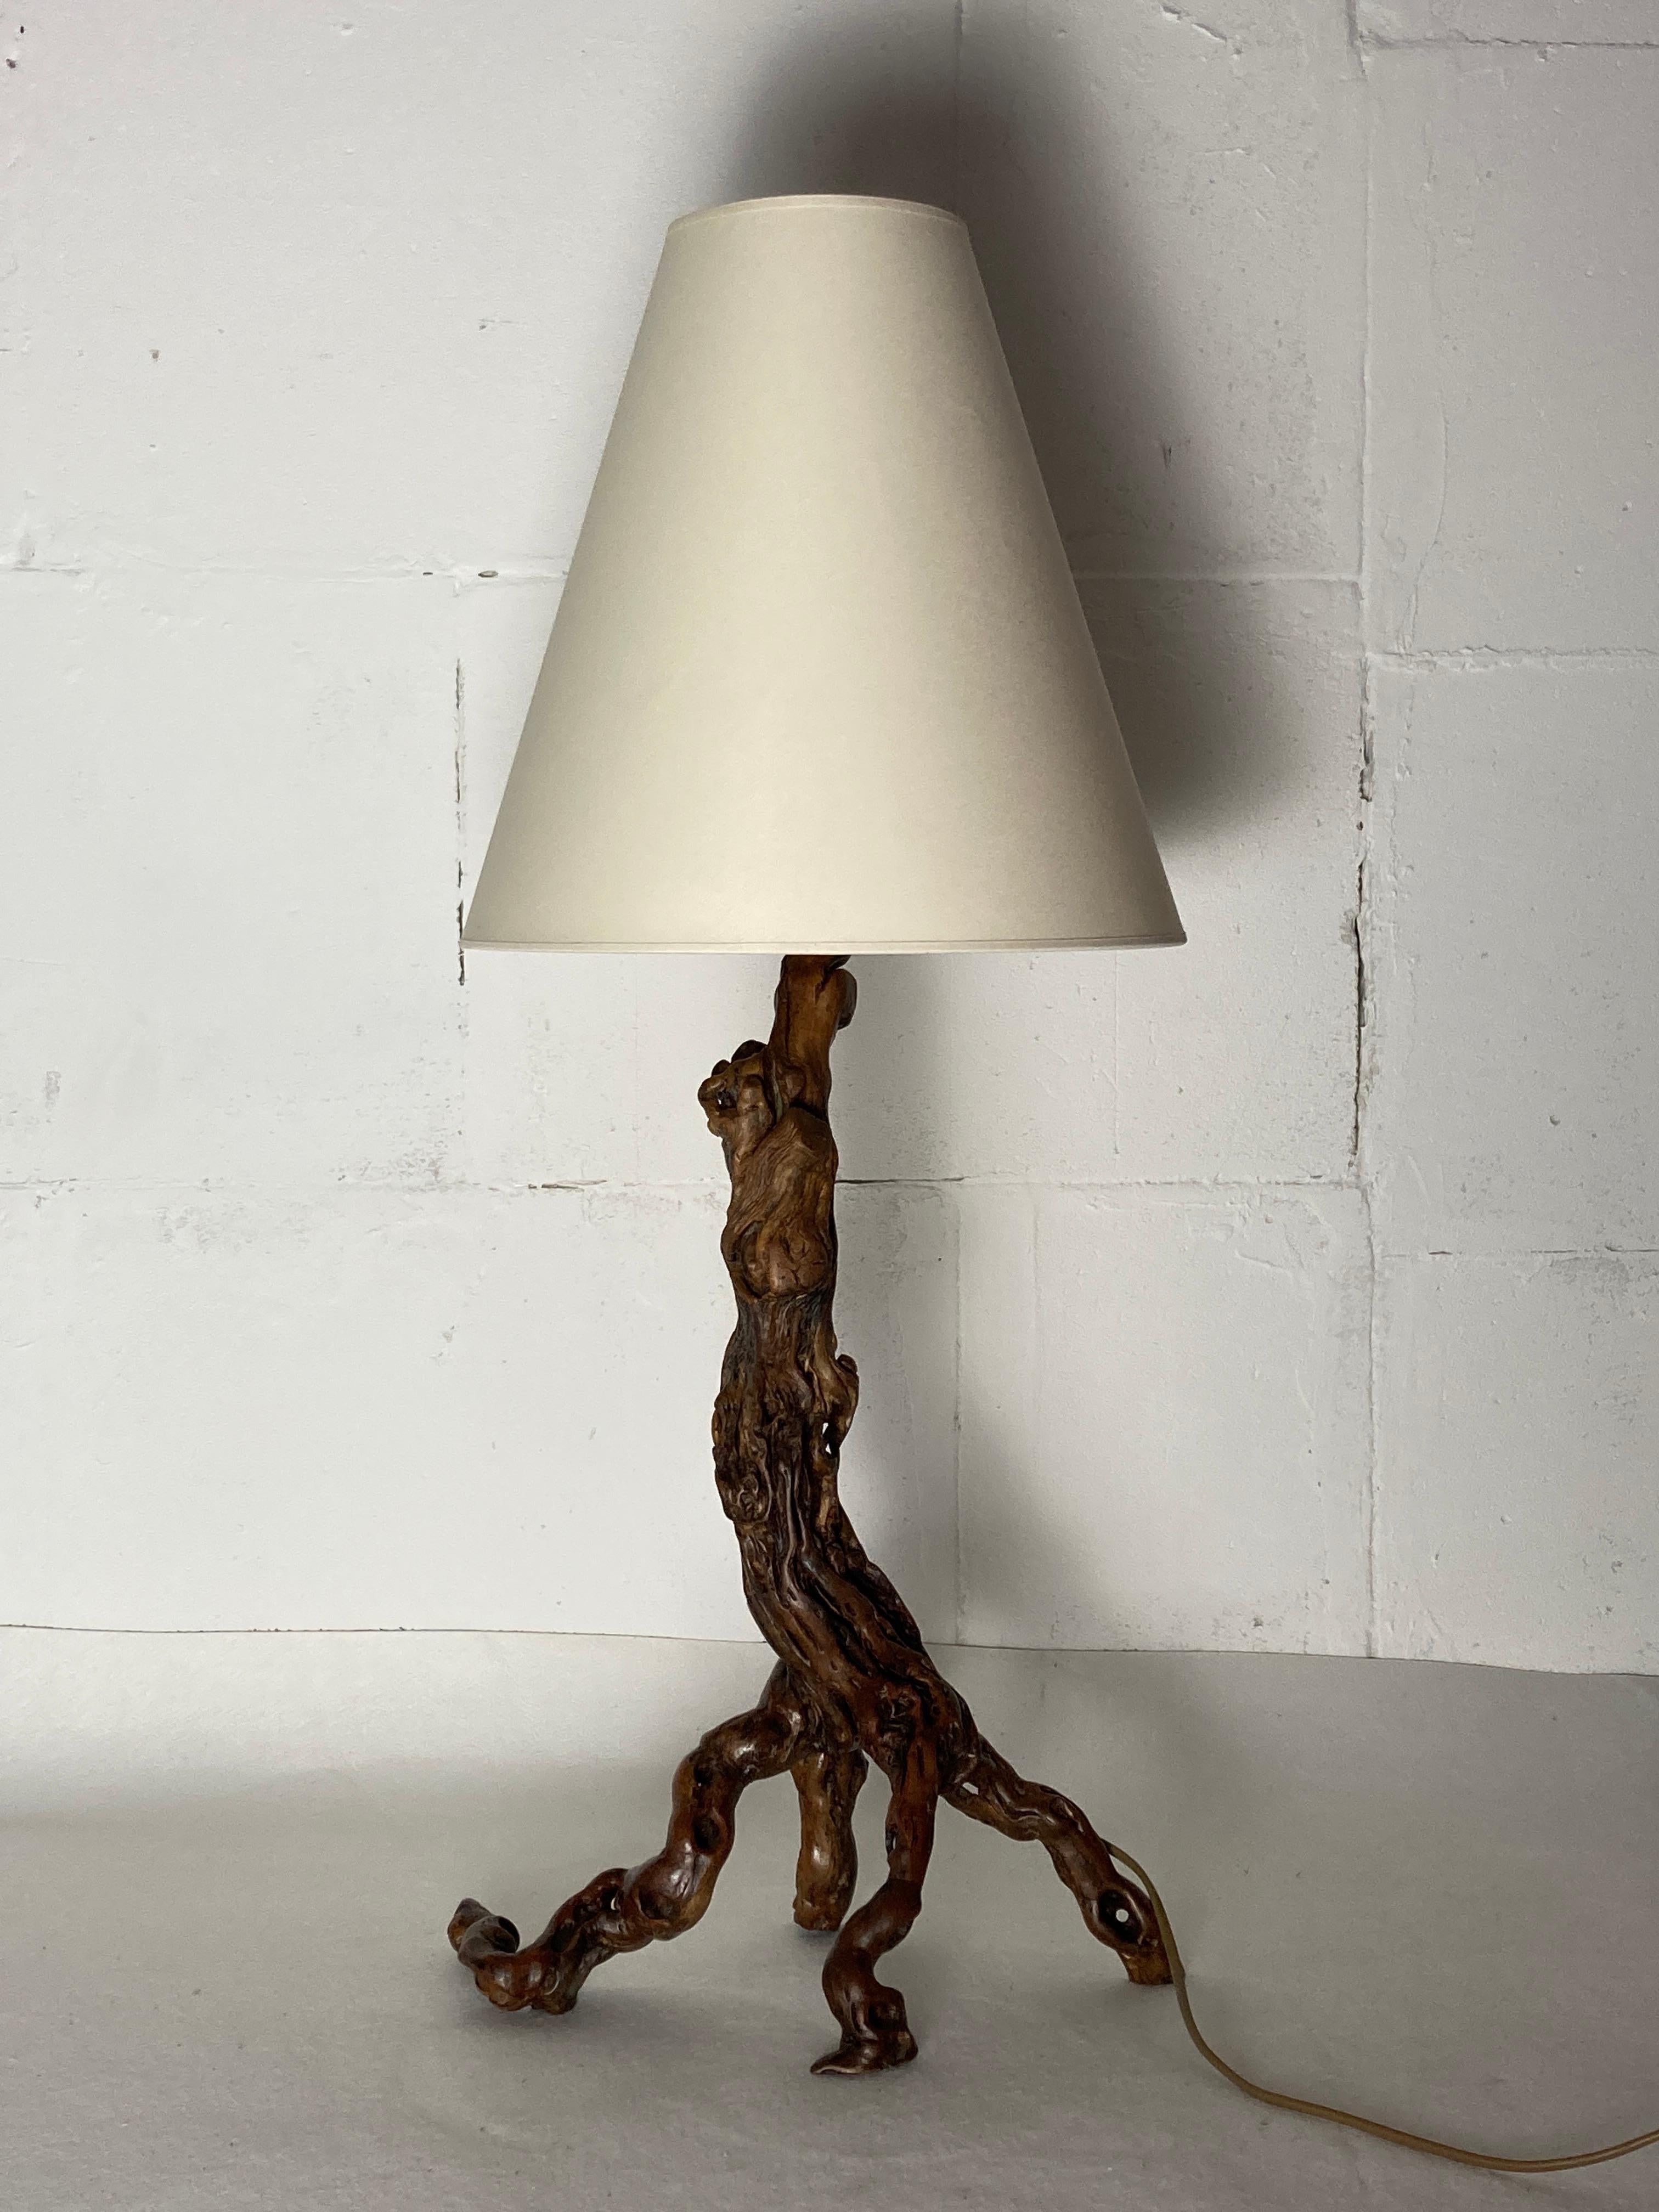 Hand-Crafted Brutalist Organic Large Vine Branch Lamp, France, 1950s For Sale